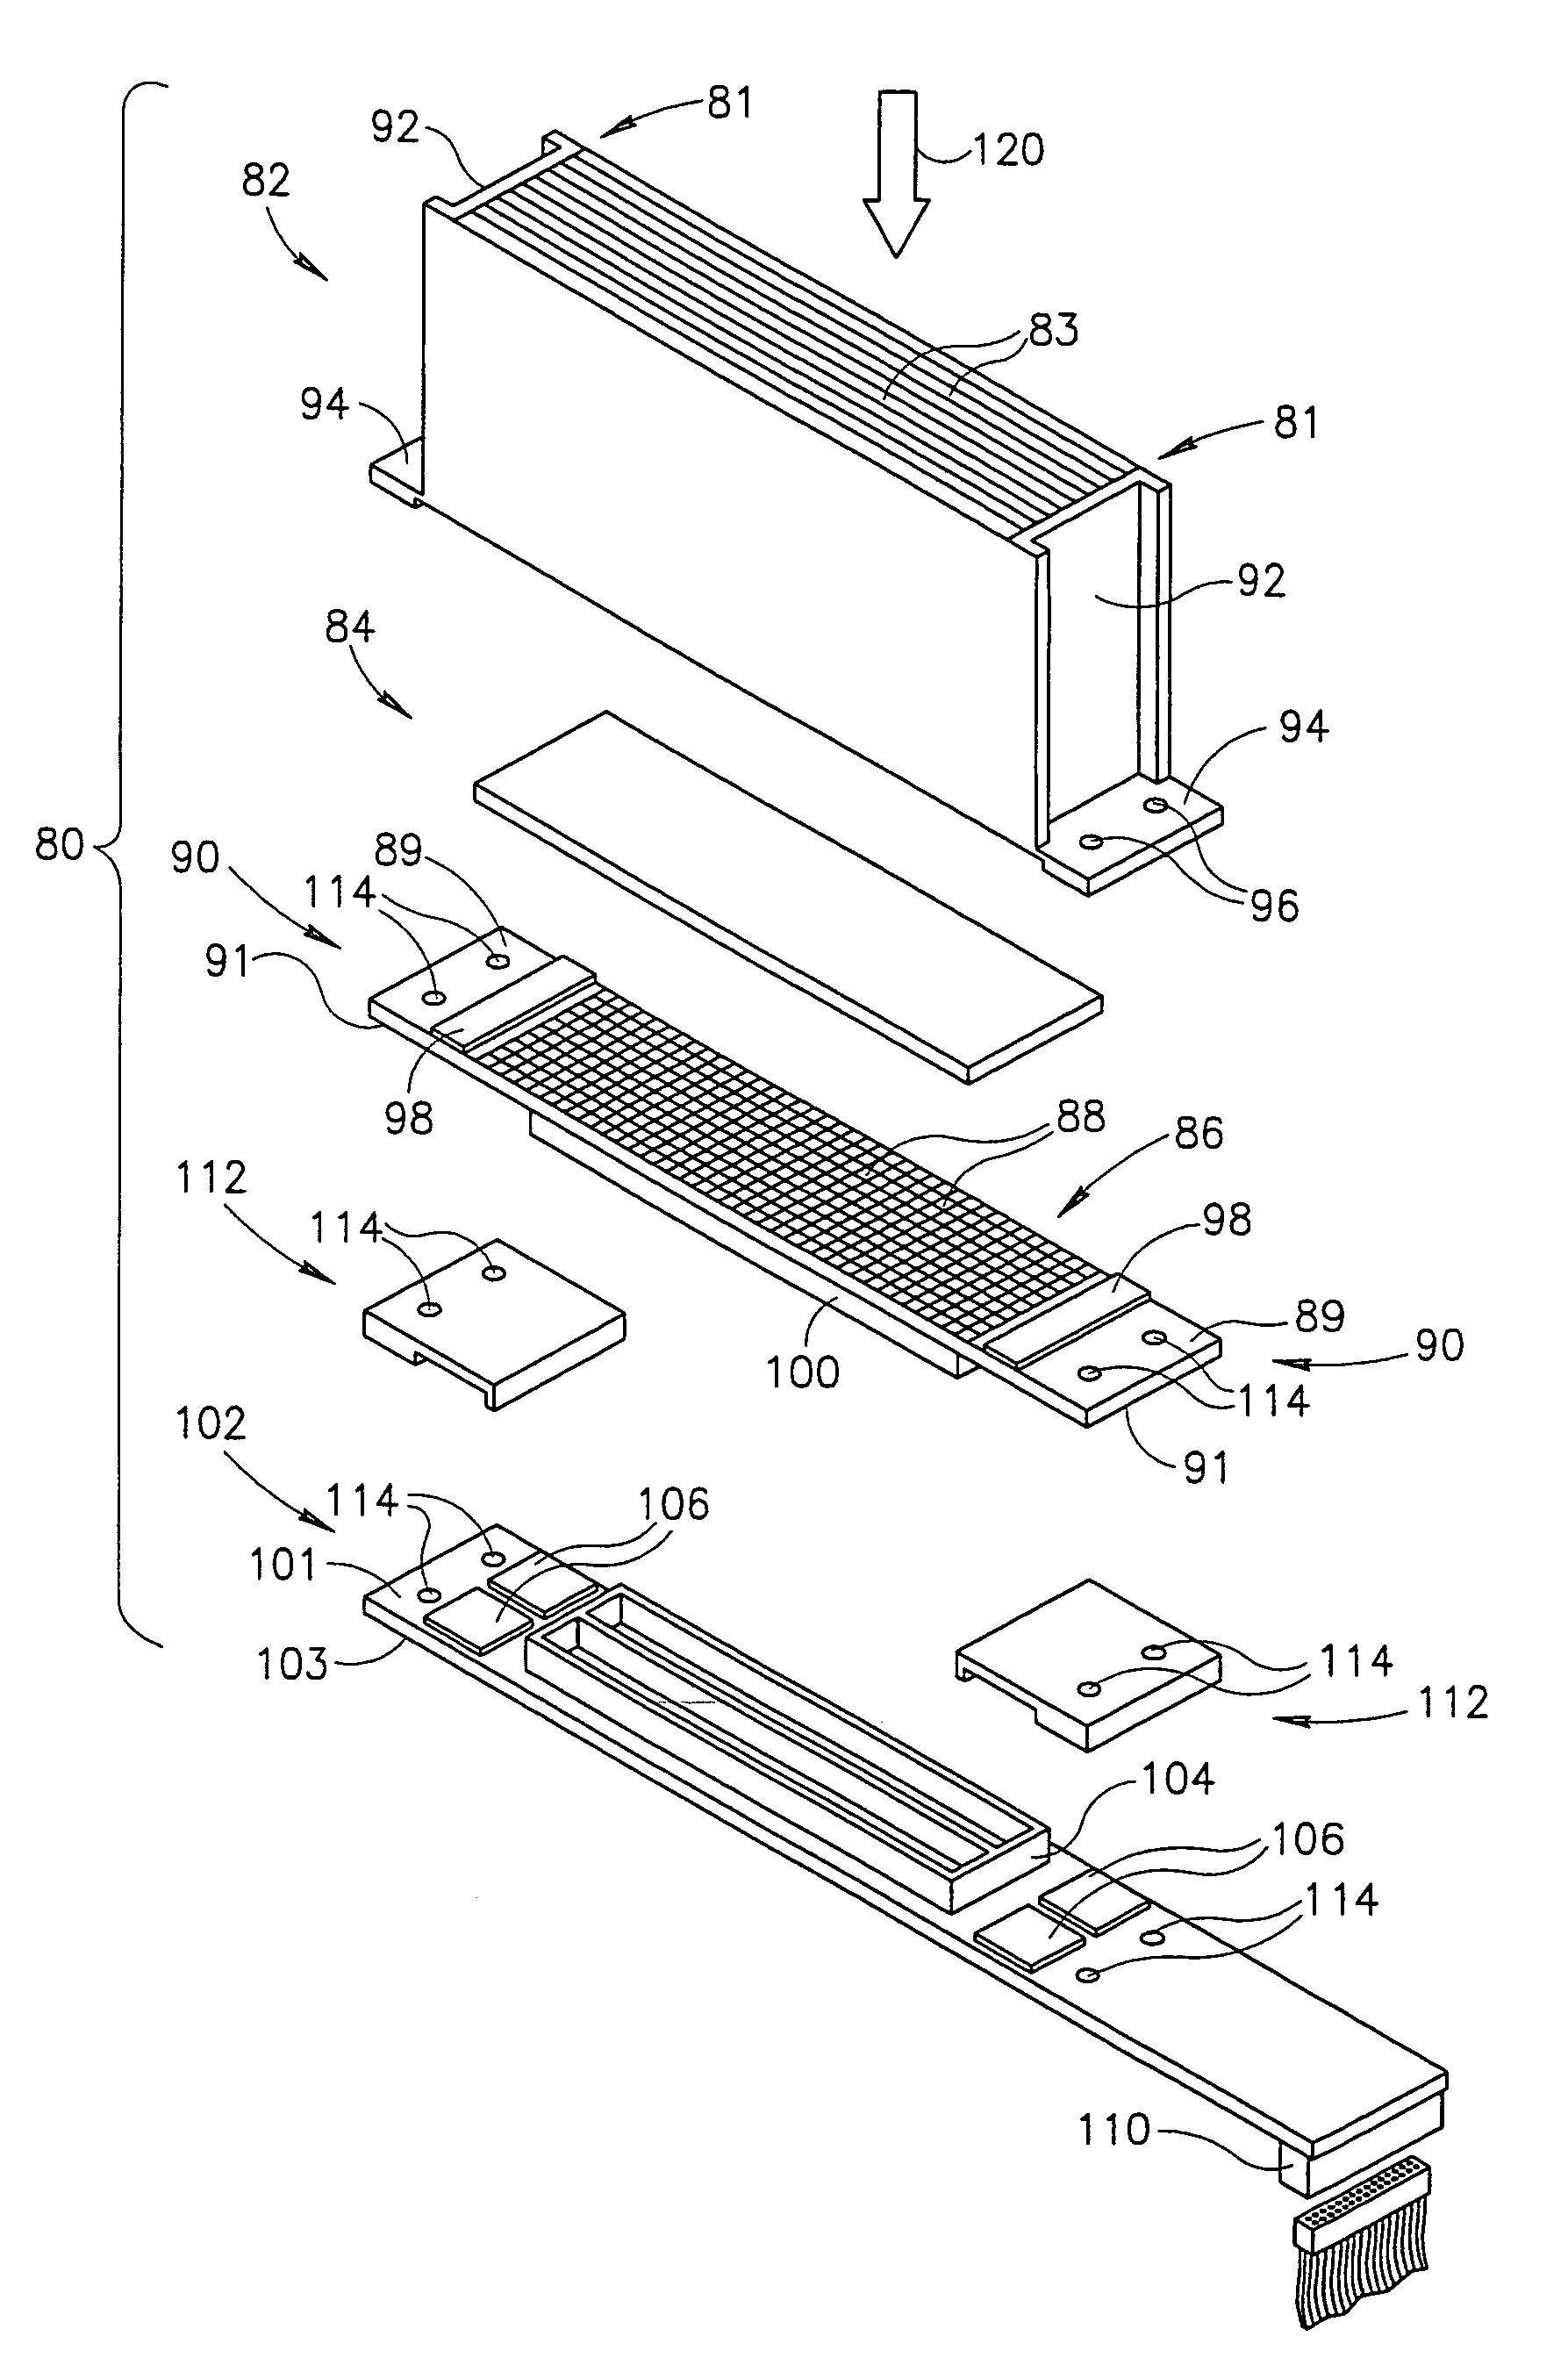 CT detector-module having radiation shielding for the processing circuitry